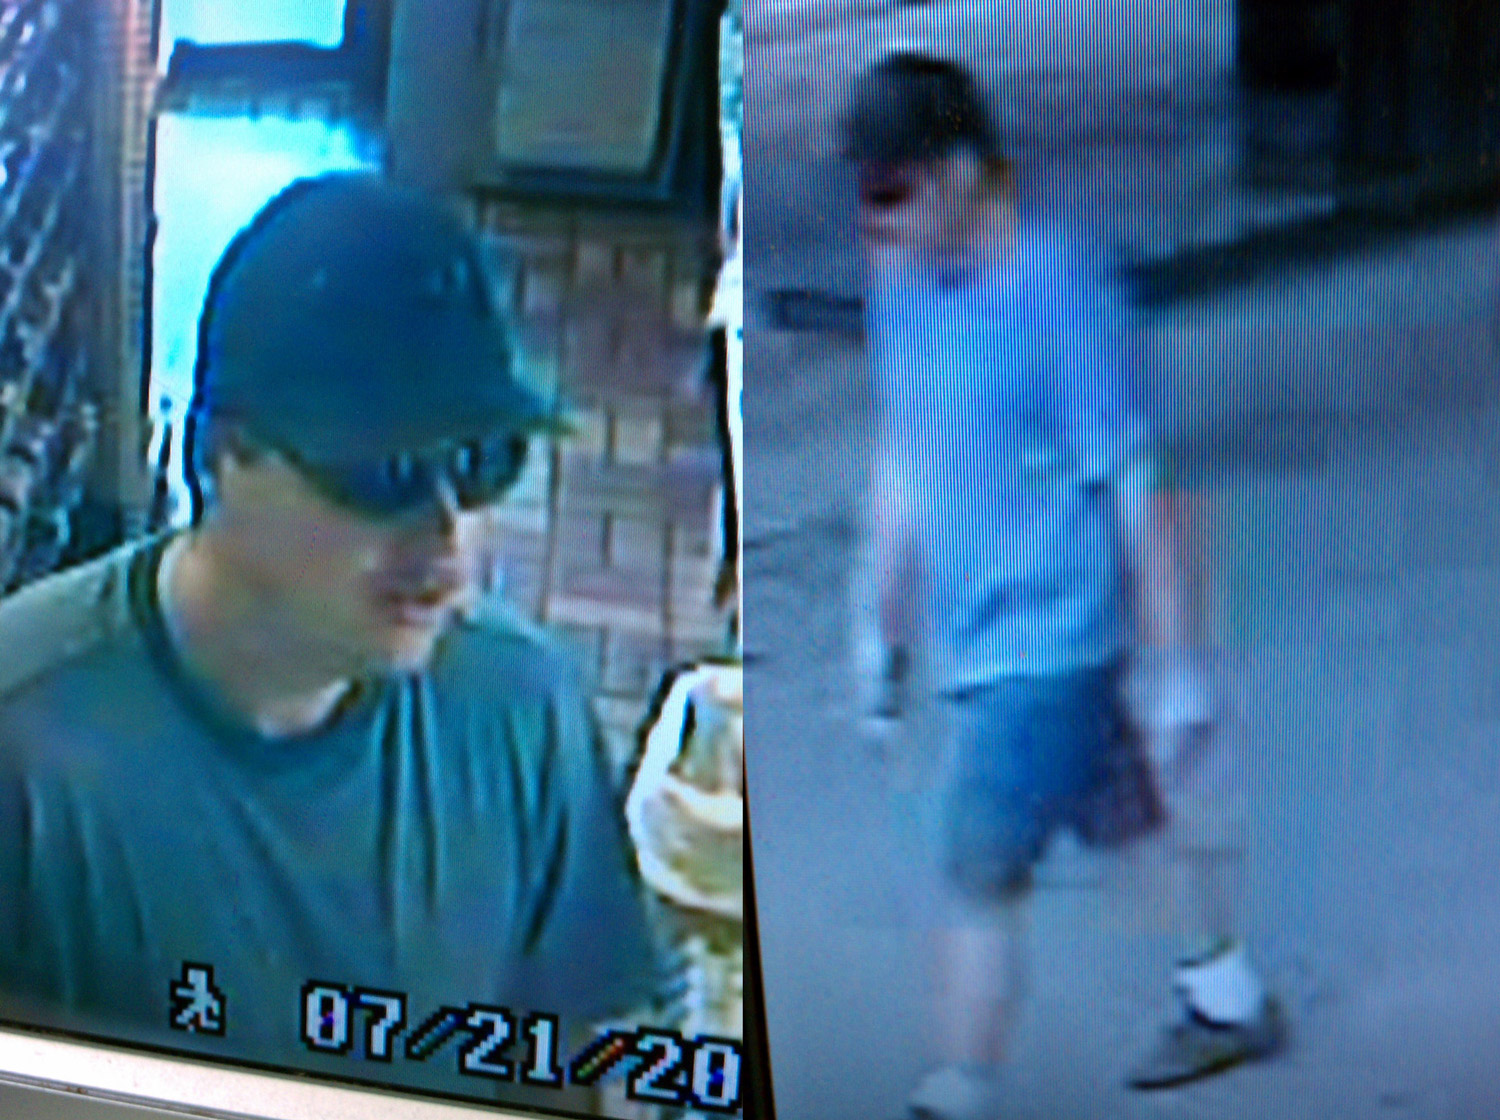 Two security screen shots of the Celico Way Shell station suspect. Click on the image for larger view.